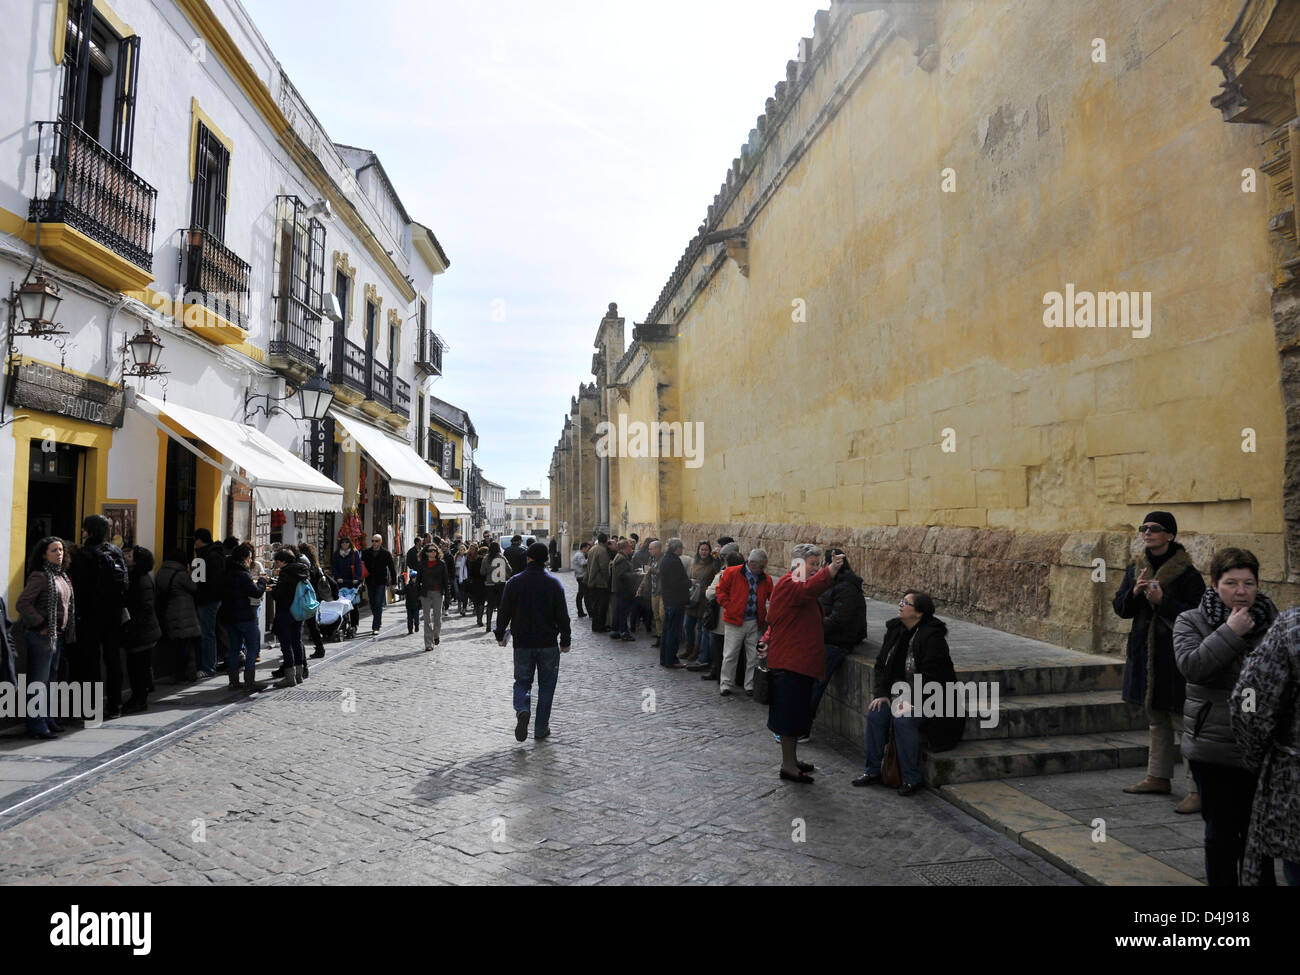 Mid-Day on a Sunday people crowd a street outside the Mezquita Mosque-Cathedral in Cordoba, Andalusia, Spain, and consume drinks Stock Photo